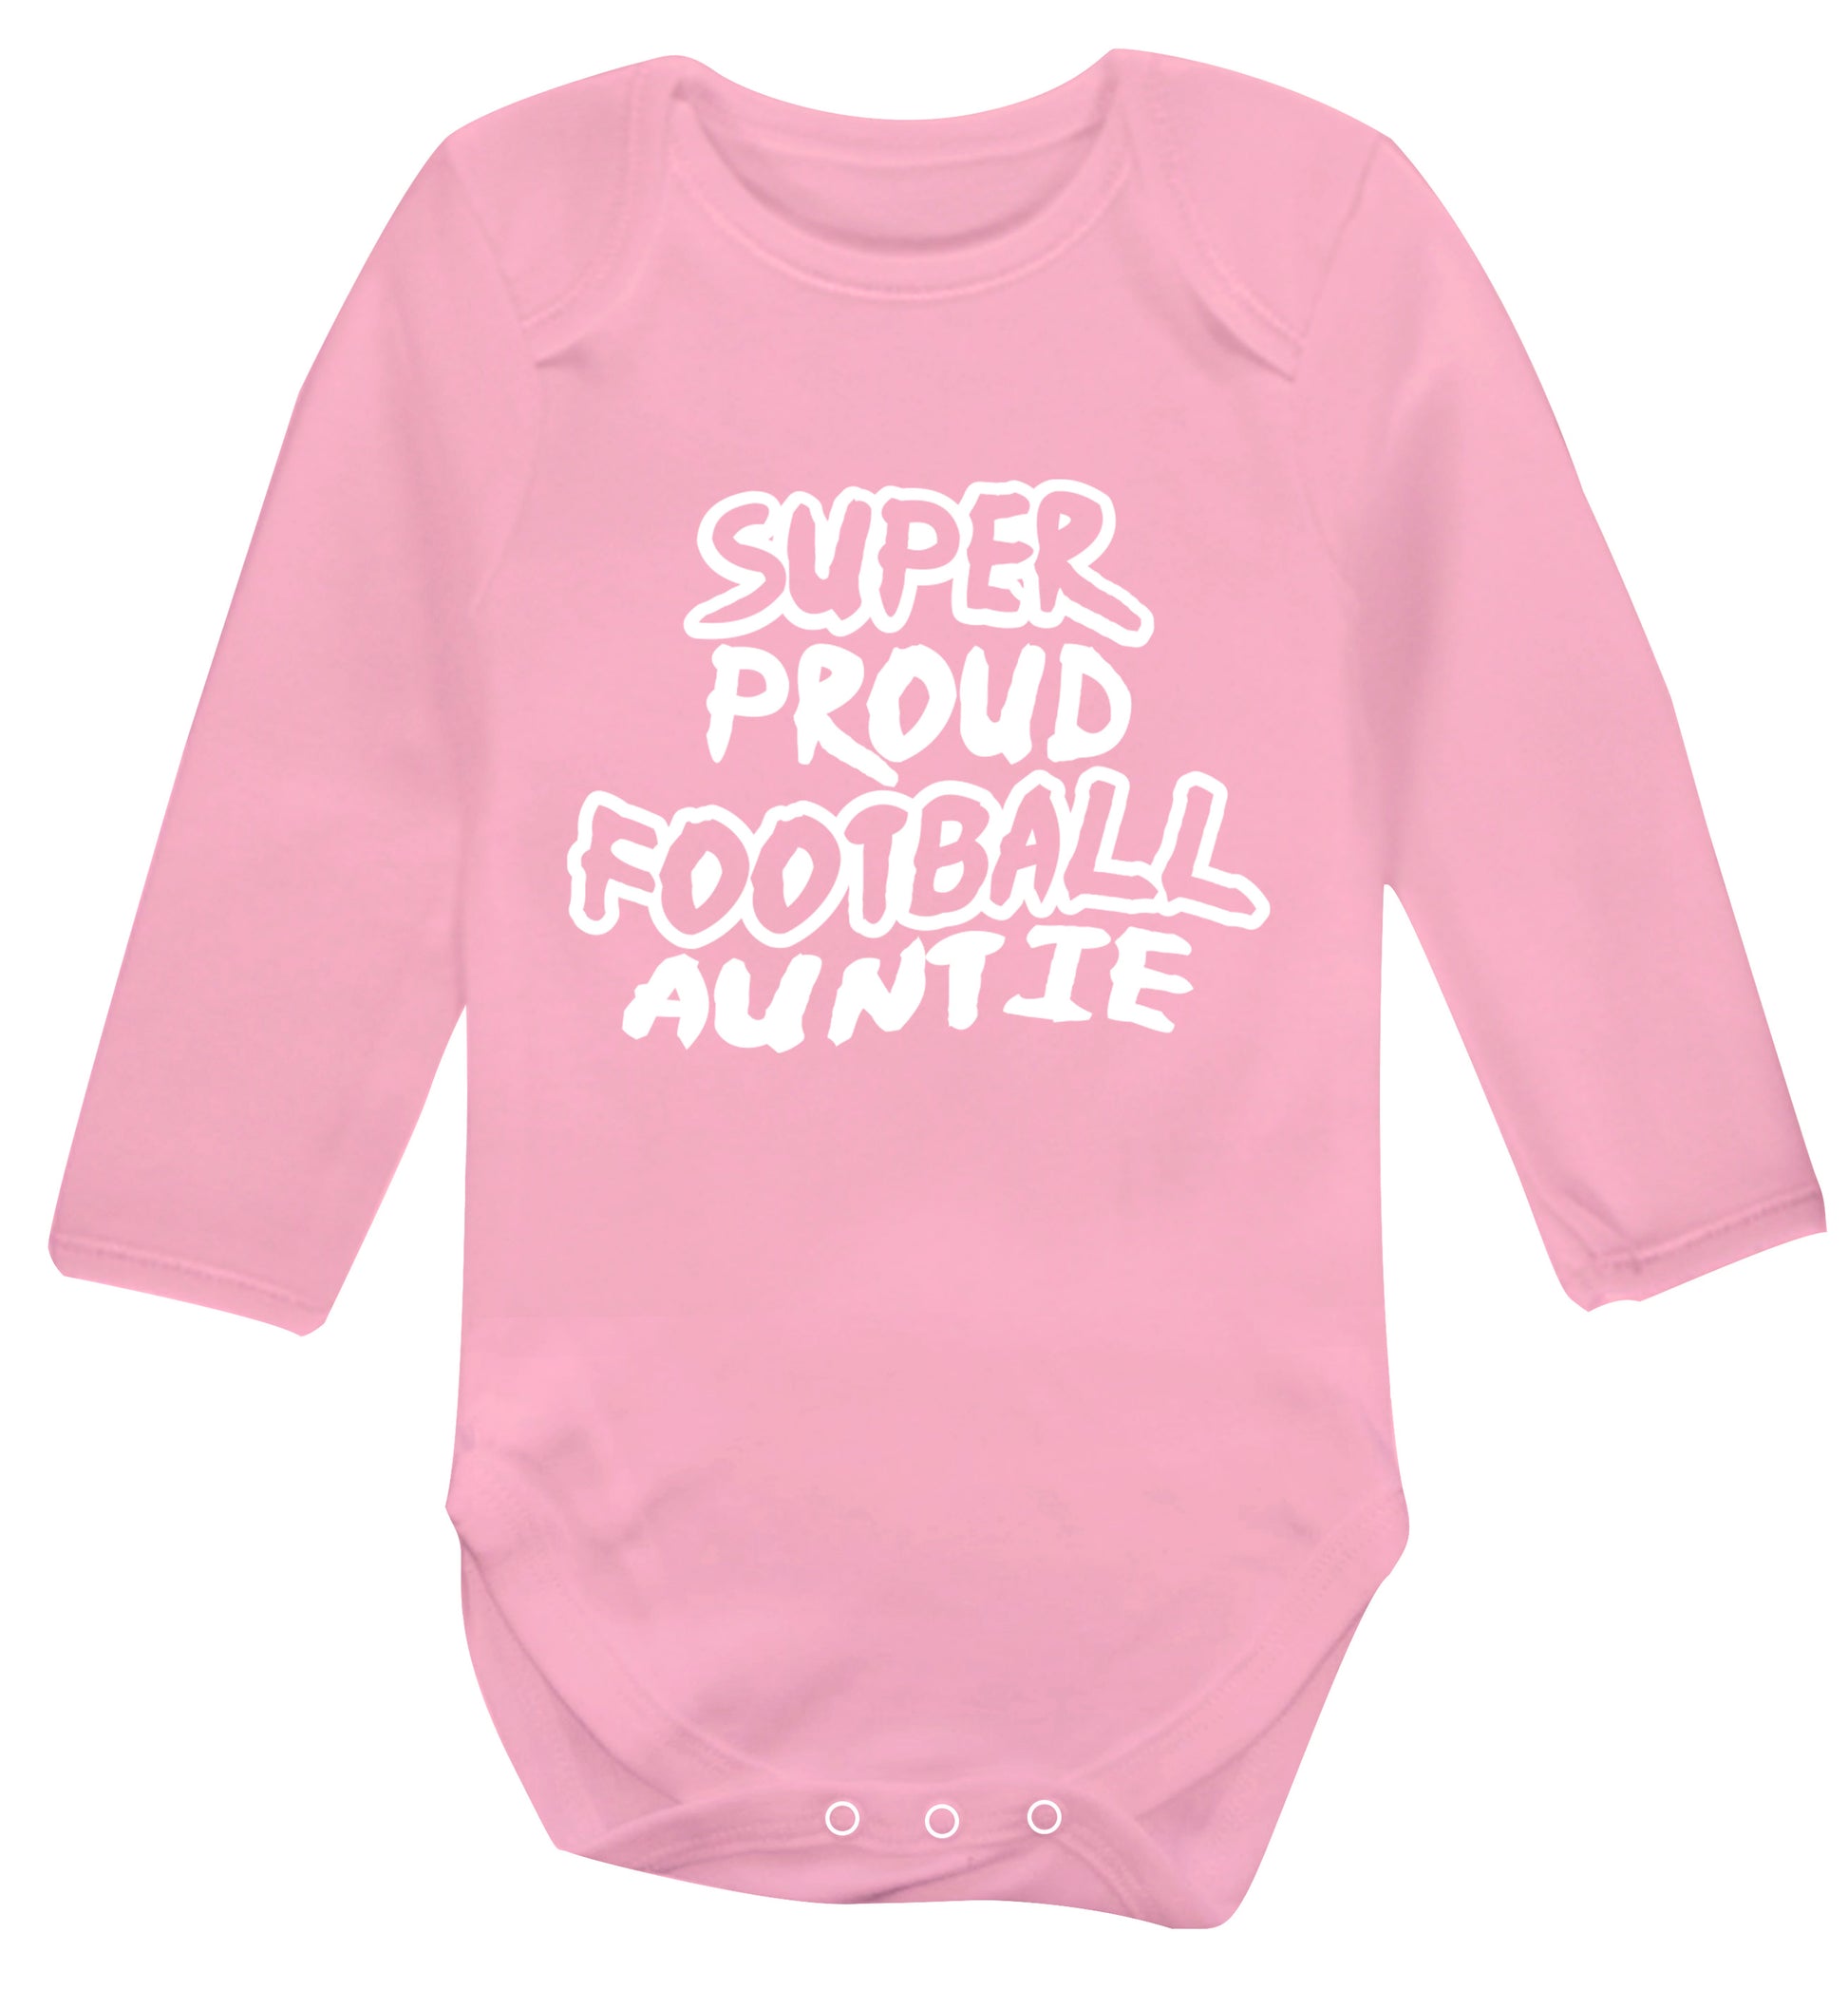 Super proud football auntie Baby Vest long sleeved pale pink 6-12 months